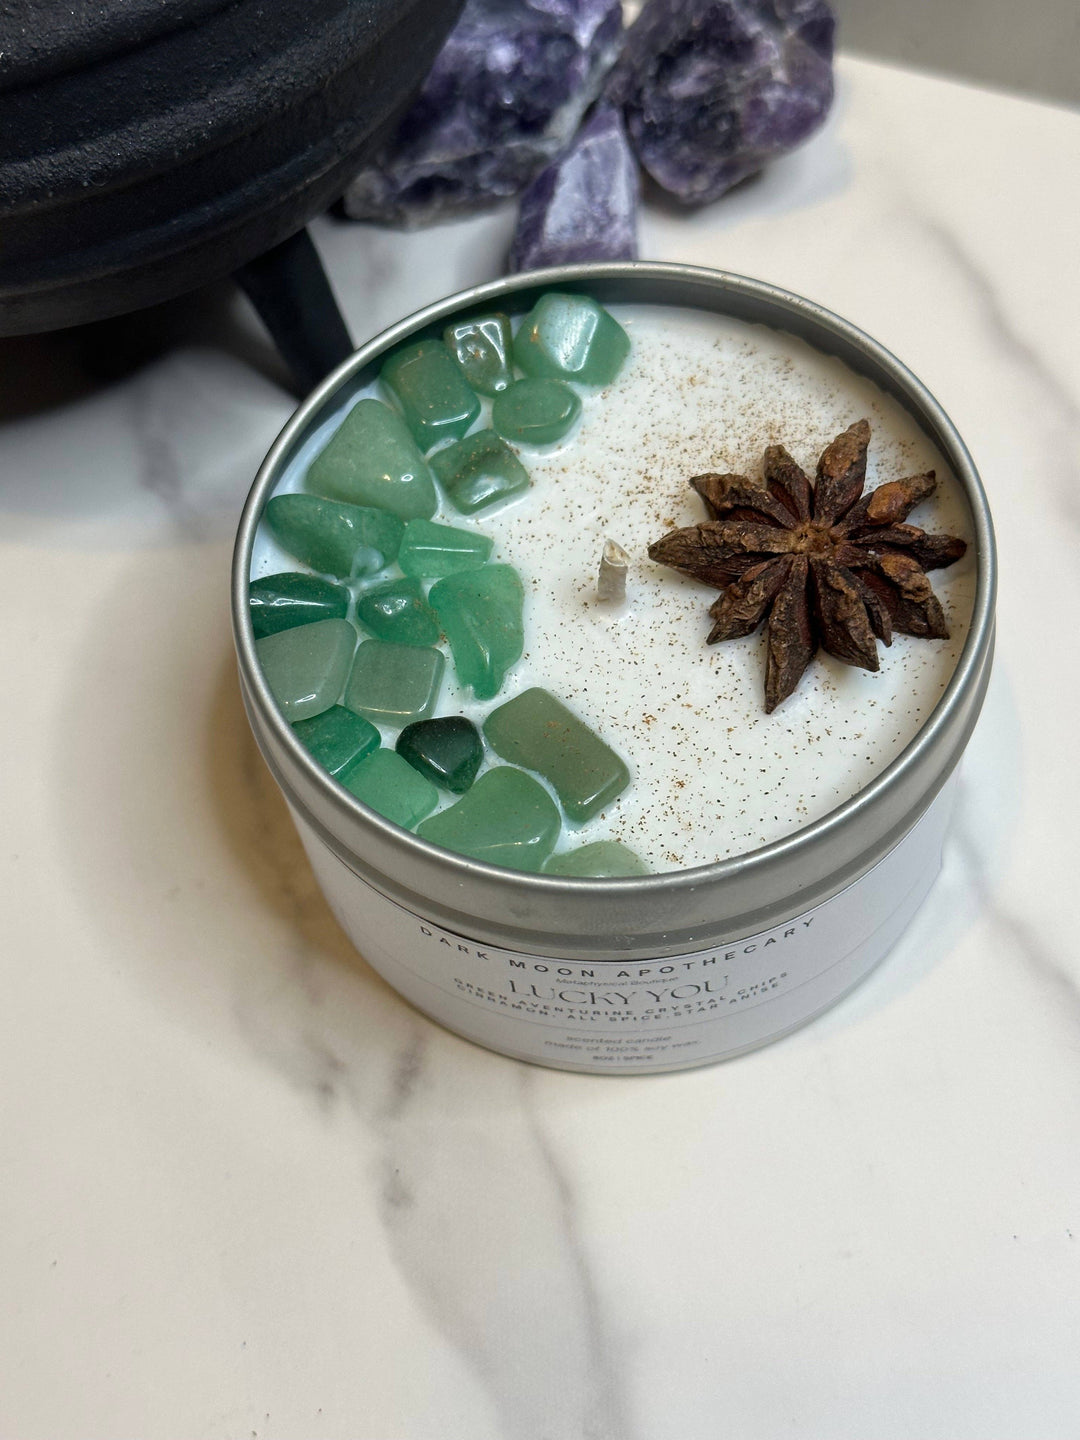 The Dark Moon Apothecary - Lucky you soy crystal candle